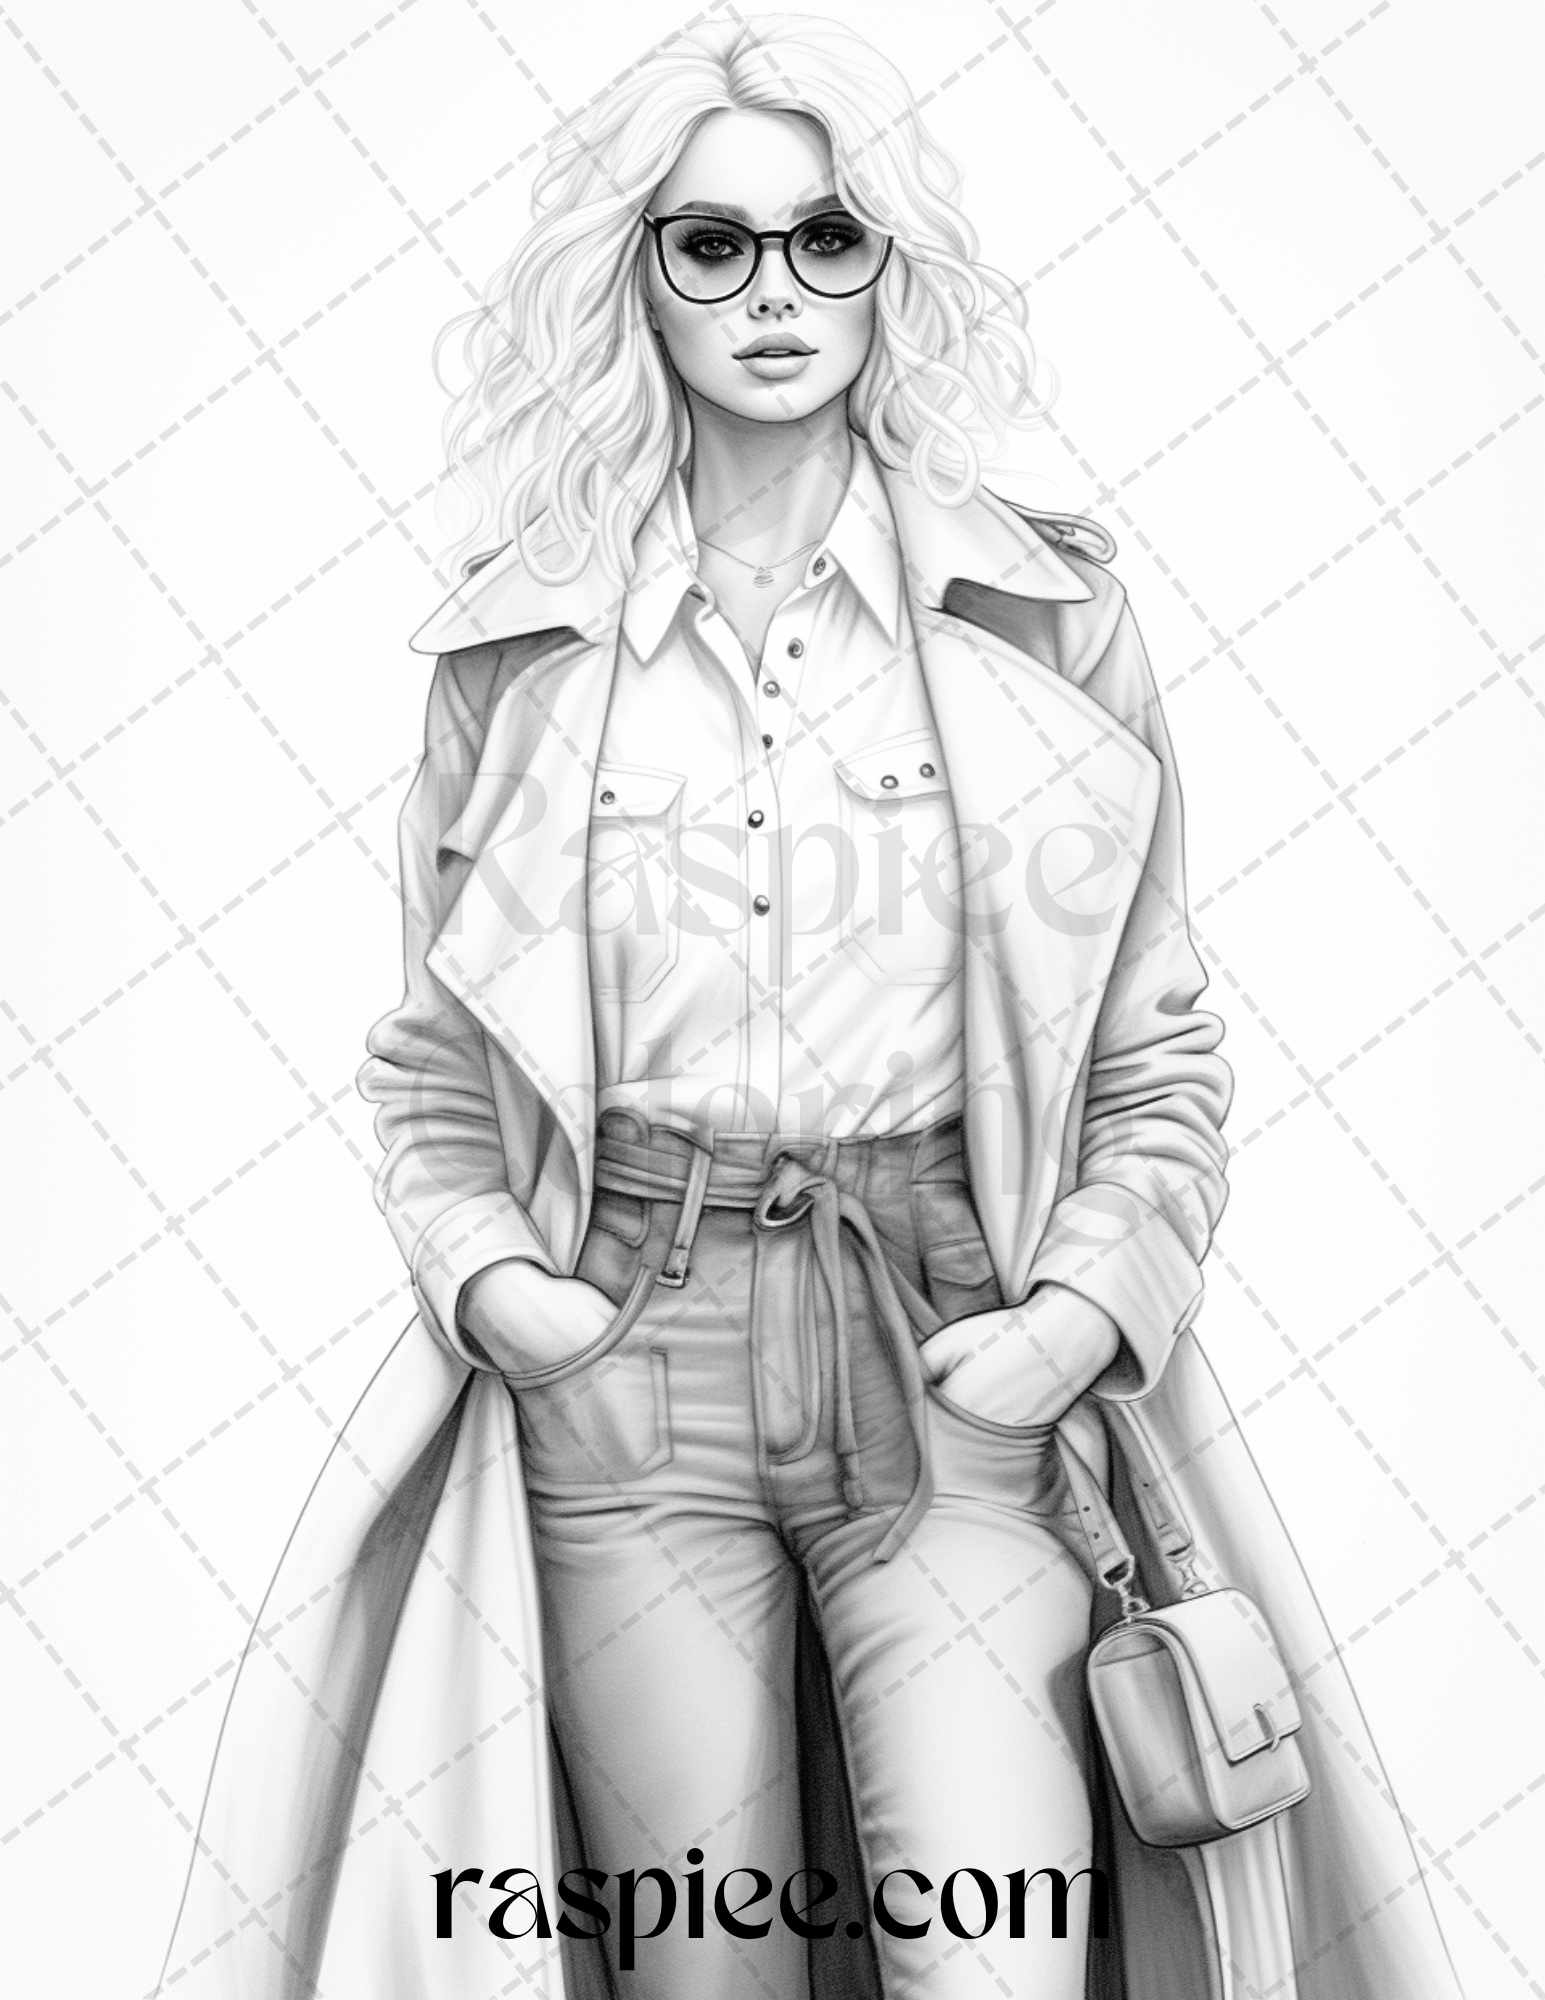 Fall Fashion Grayscale Coloring Pages, Adult Autumn Printable Coloring Sheets, DIY Grayscale Coloring Art, Relaxing Seasonal Coloring Activities, Autumn Fashion Coloring Pages for Adults